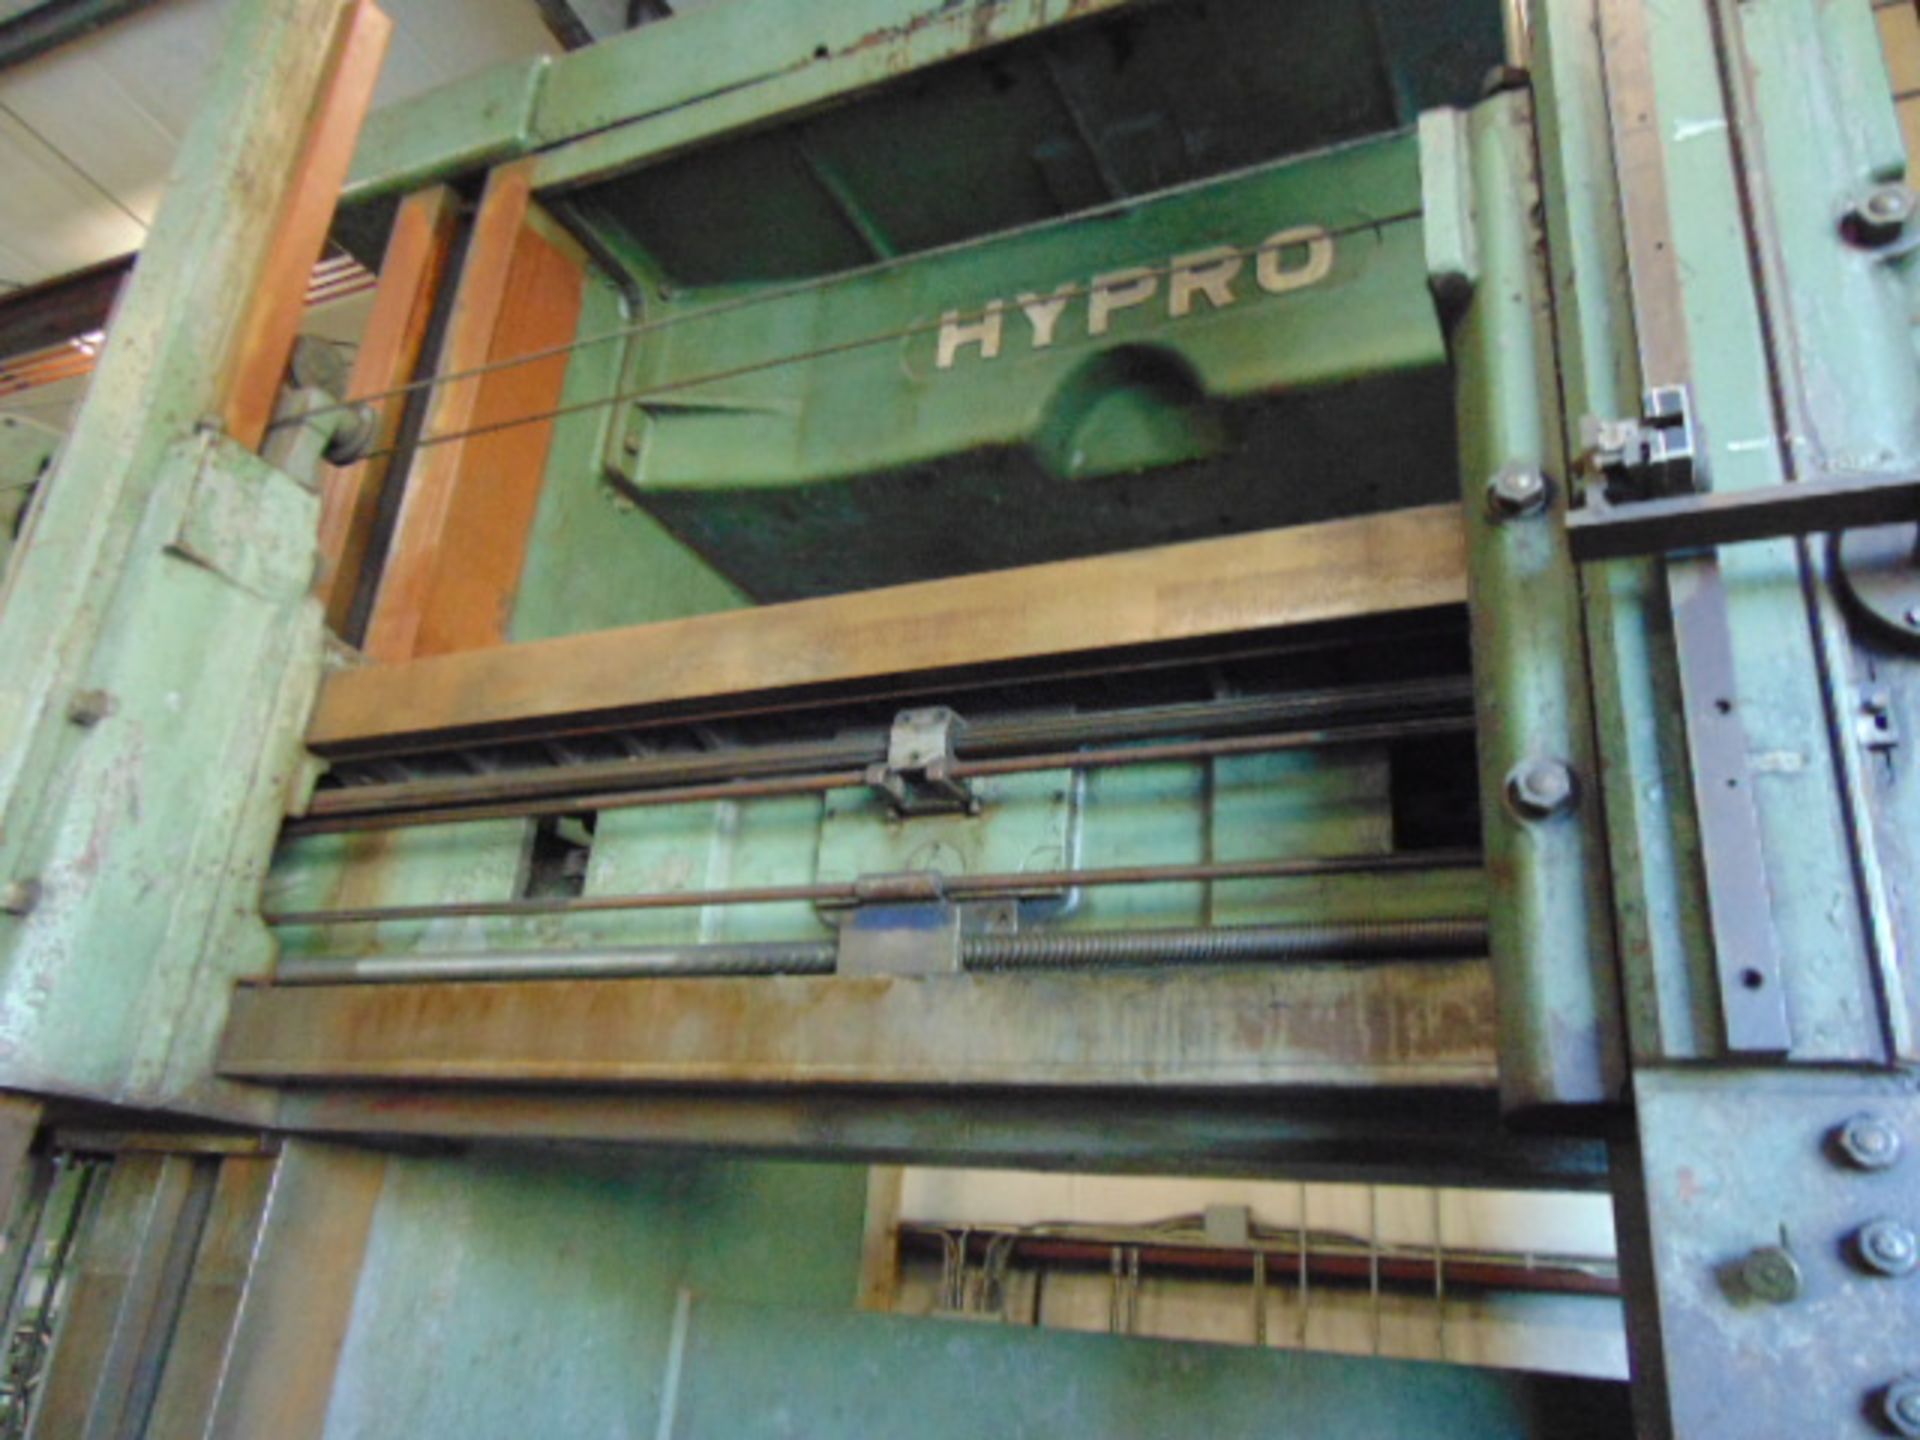 VERTICAL BORING MILL, GIDDINGS & LEWIS HYPRO 96”, approx. 104” sw. to column, approx. 96” under